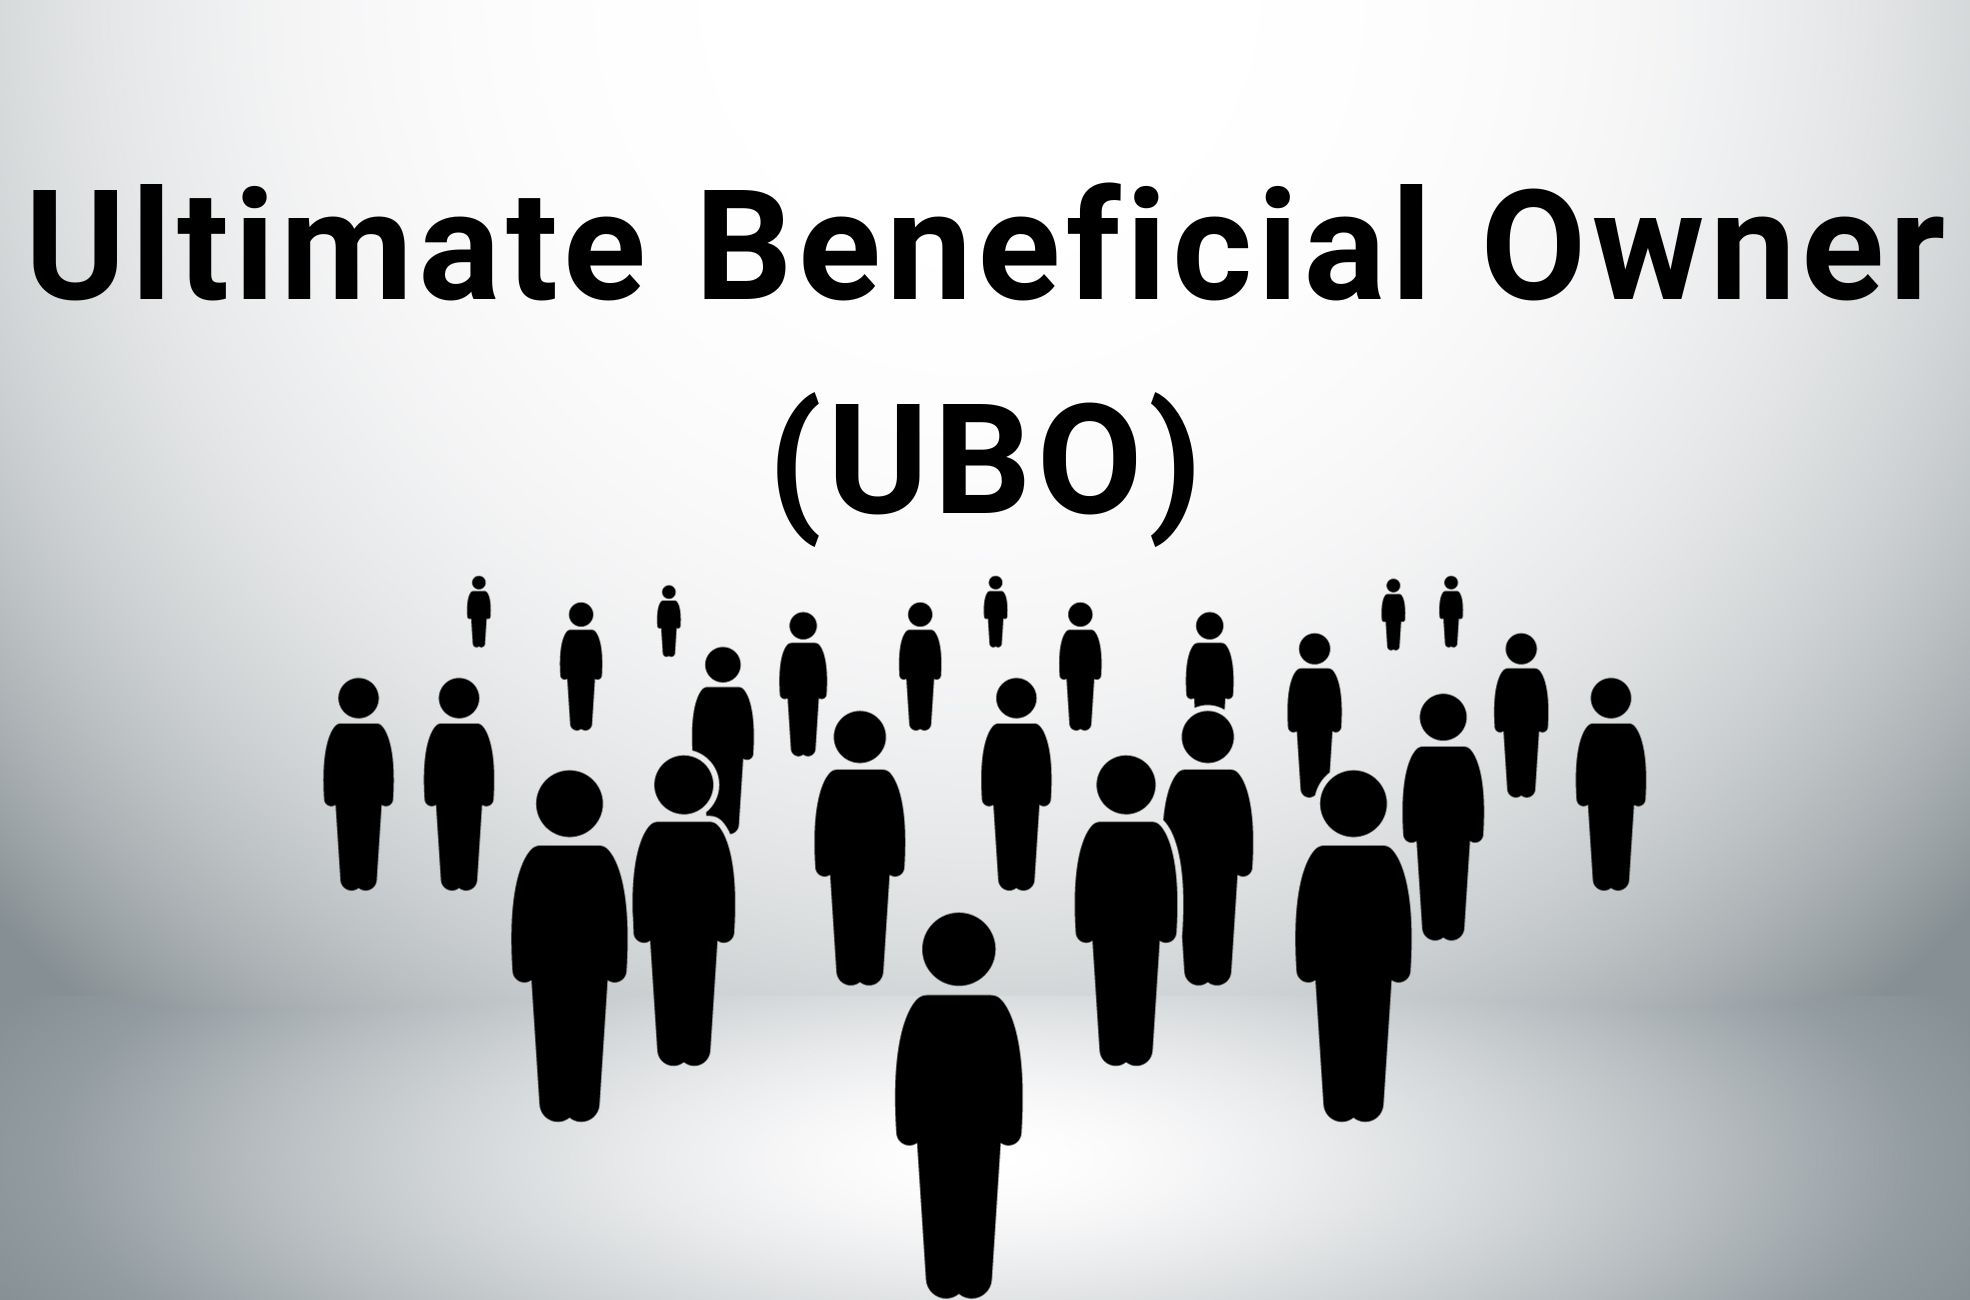 OUR LEGAL GUIDE ON WHAT YOU NEED TO KNOW ABOUT FILING YOUR BUSINESS’S ULTIMATE BENEFICIAL OWNER’S INFORMATION (UBO FILINGS) IN RWANDA.